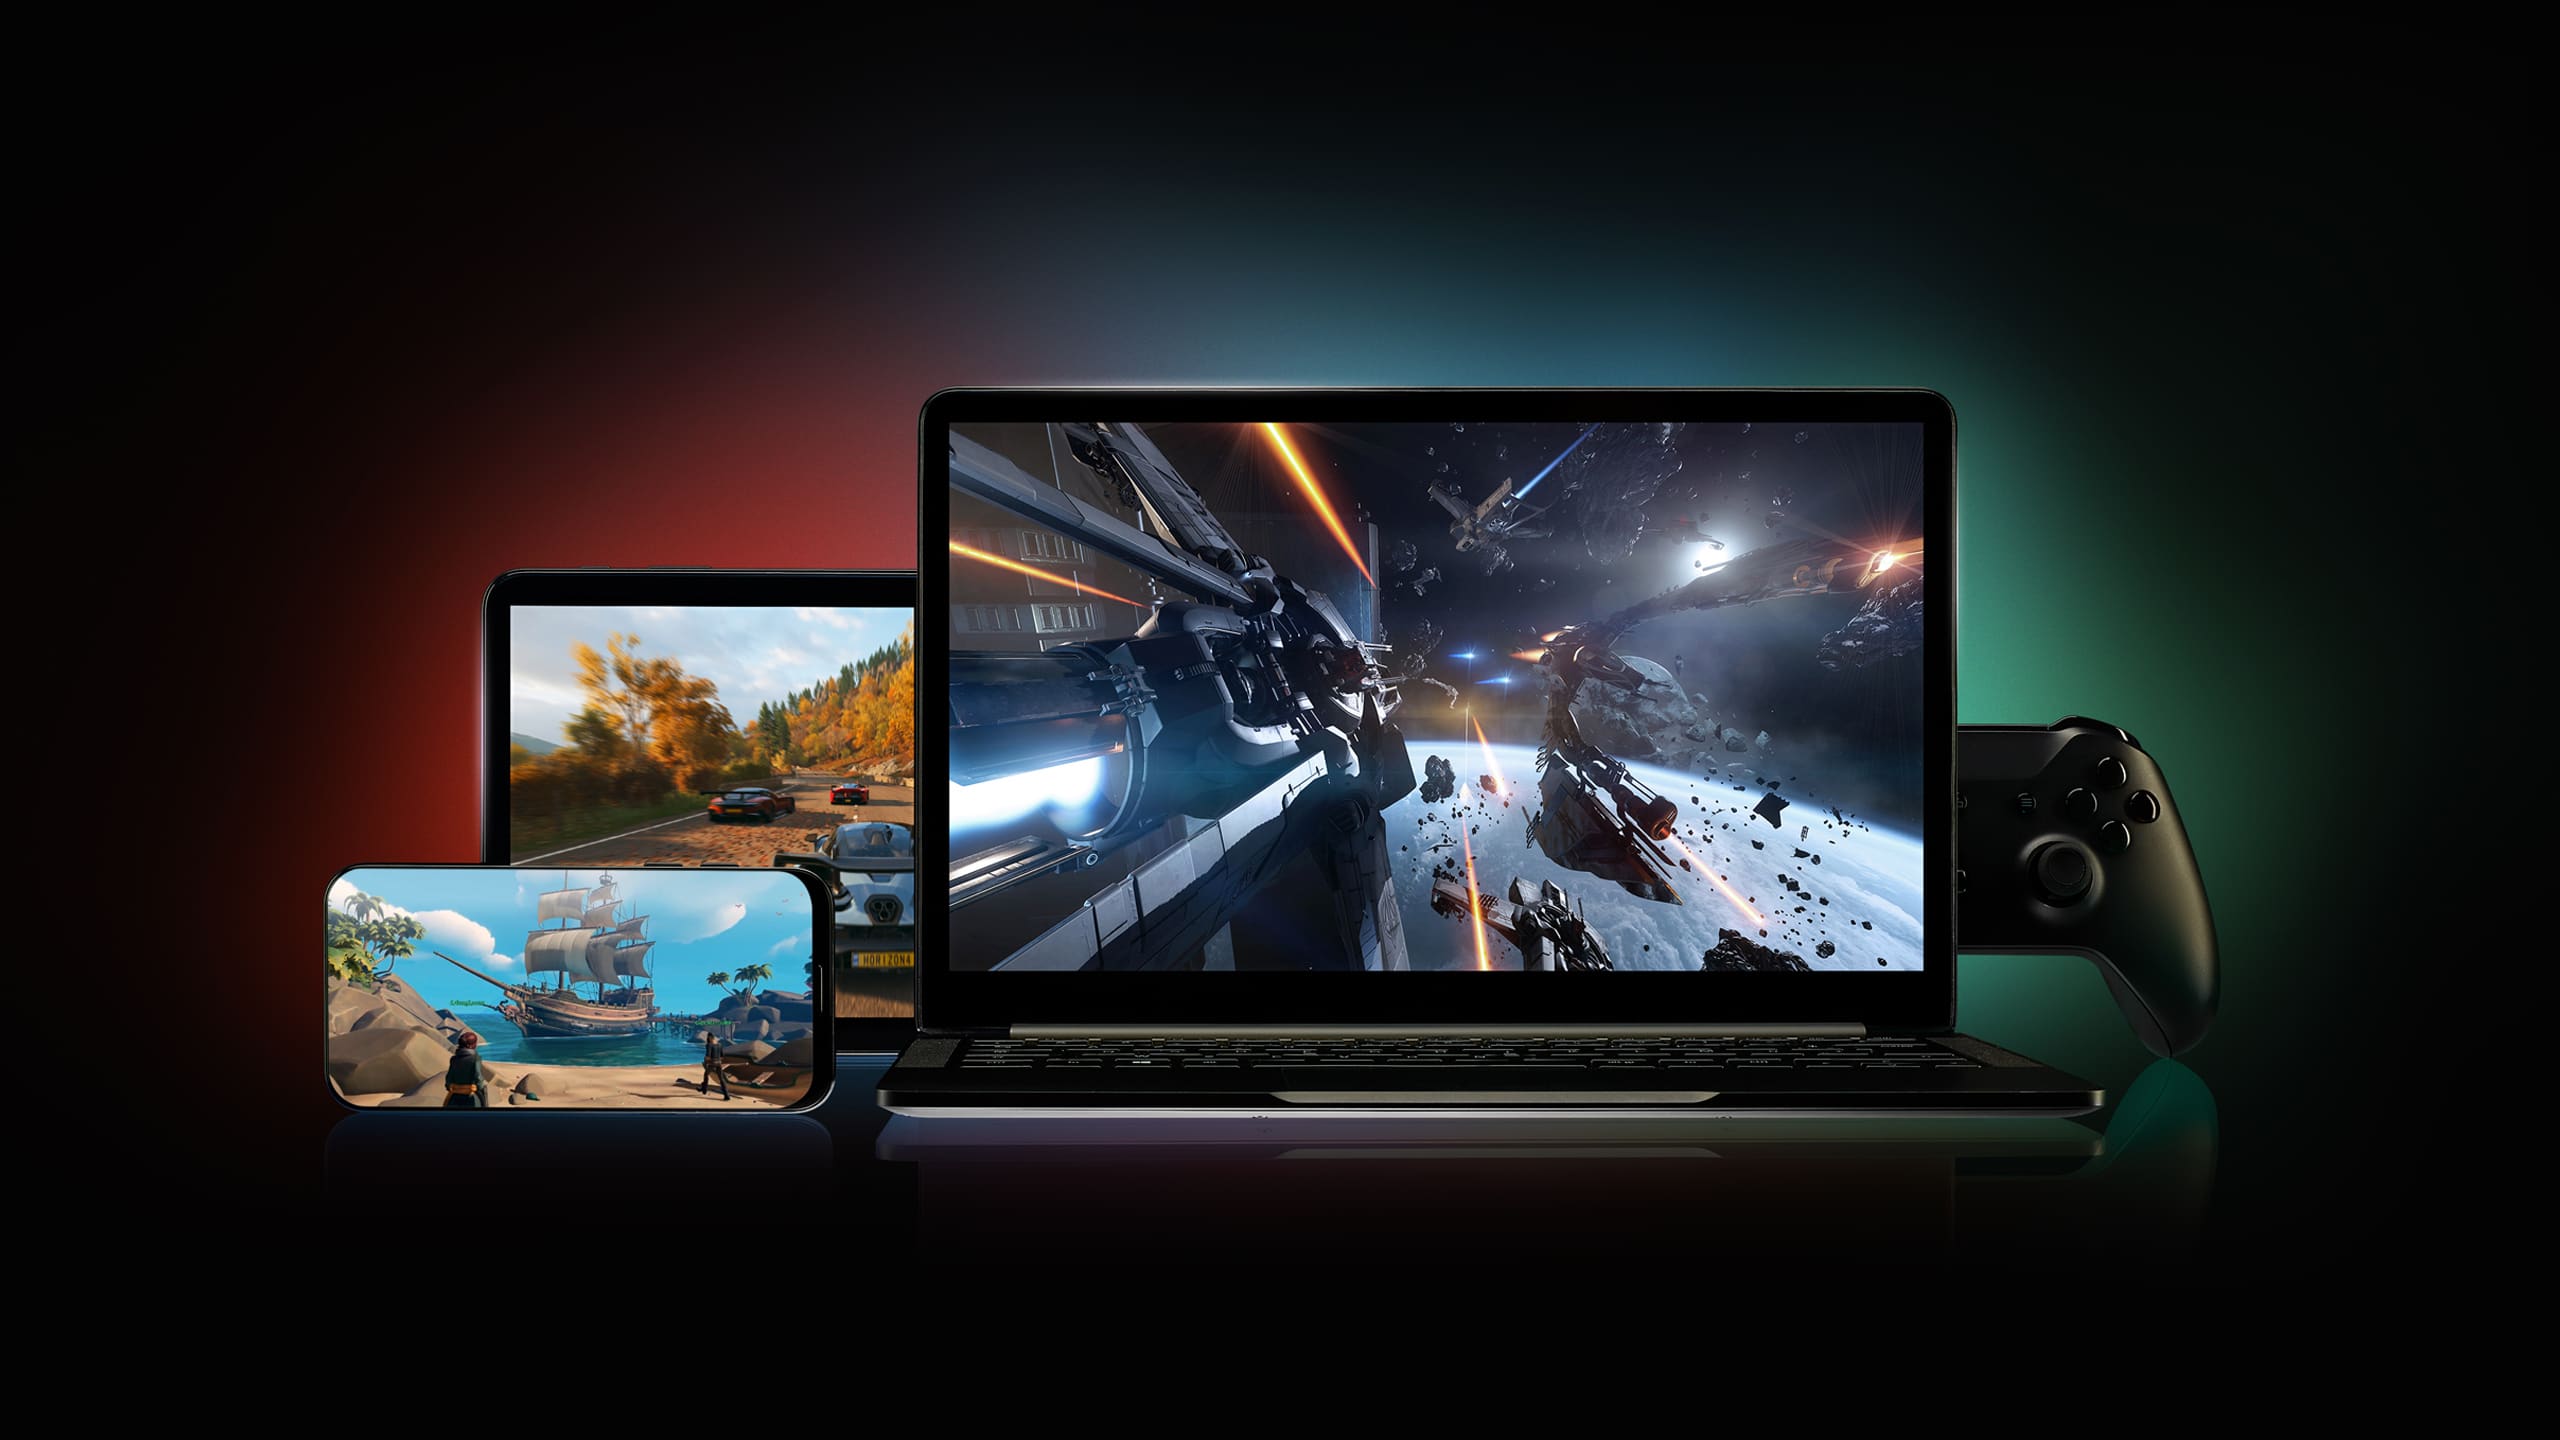 The 10 Best Cloud Gaming Services For Streaming Free Video Games
